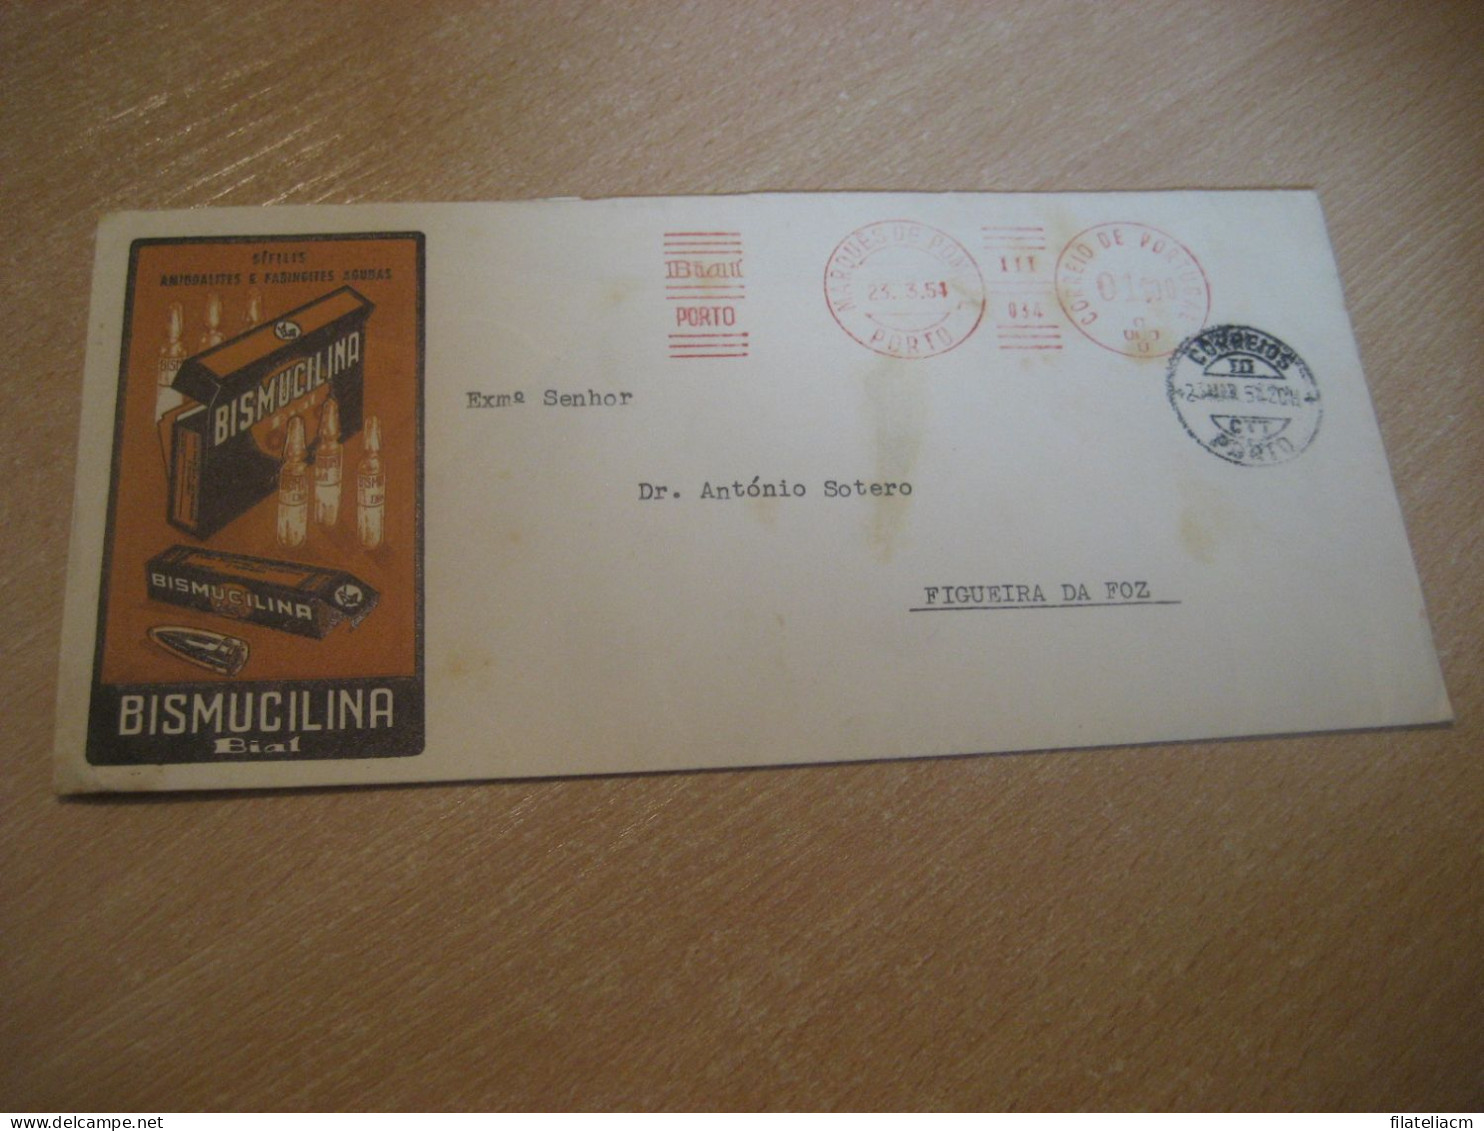 PORTO 1954 To Figueira Da Foz Bial Bismucilina Pharmacy Health Chemical Meter Mail Cancel Cover PORTUGAL - Storia Postale